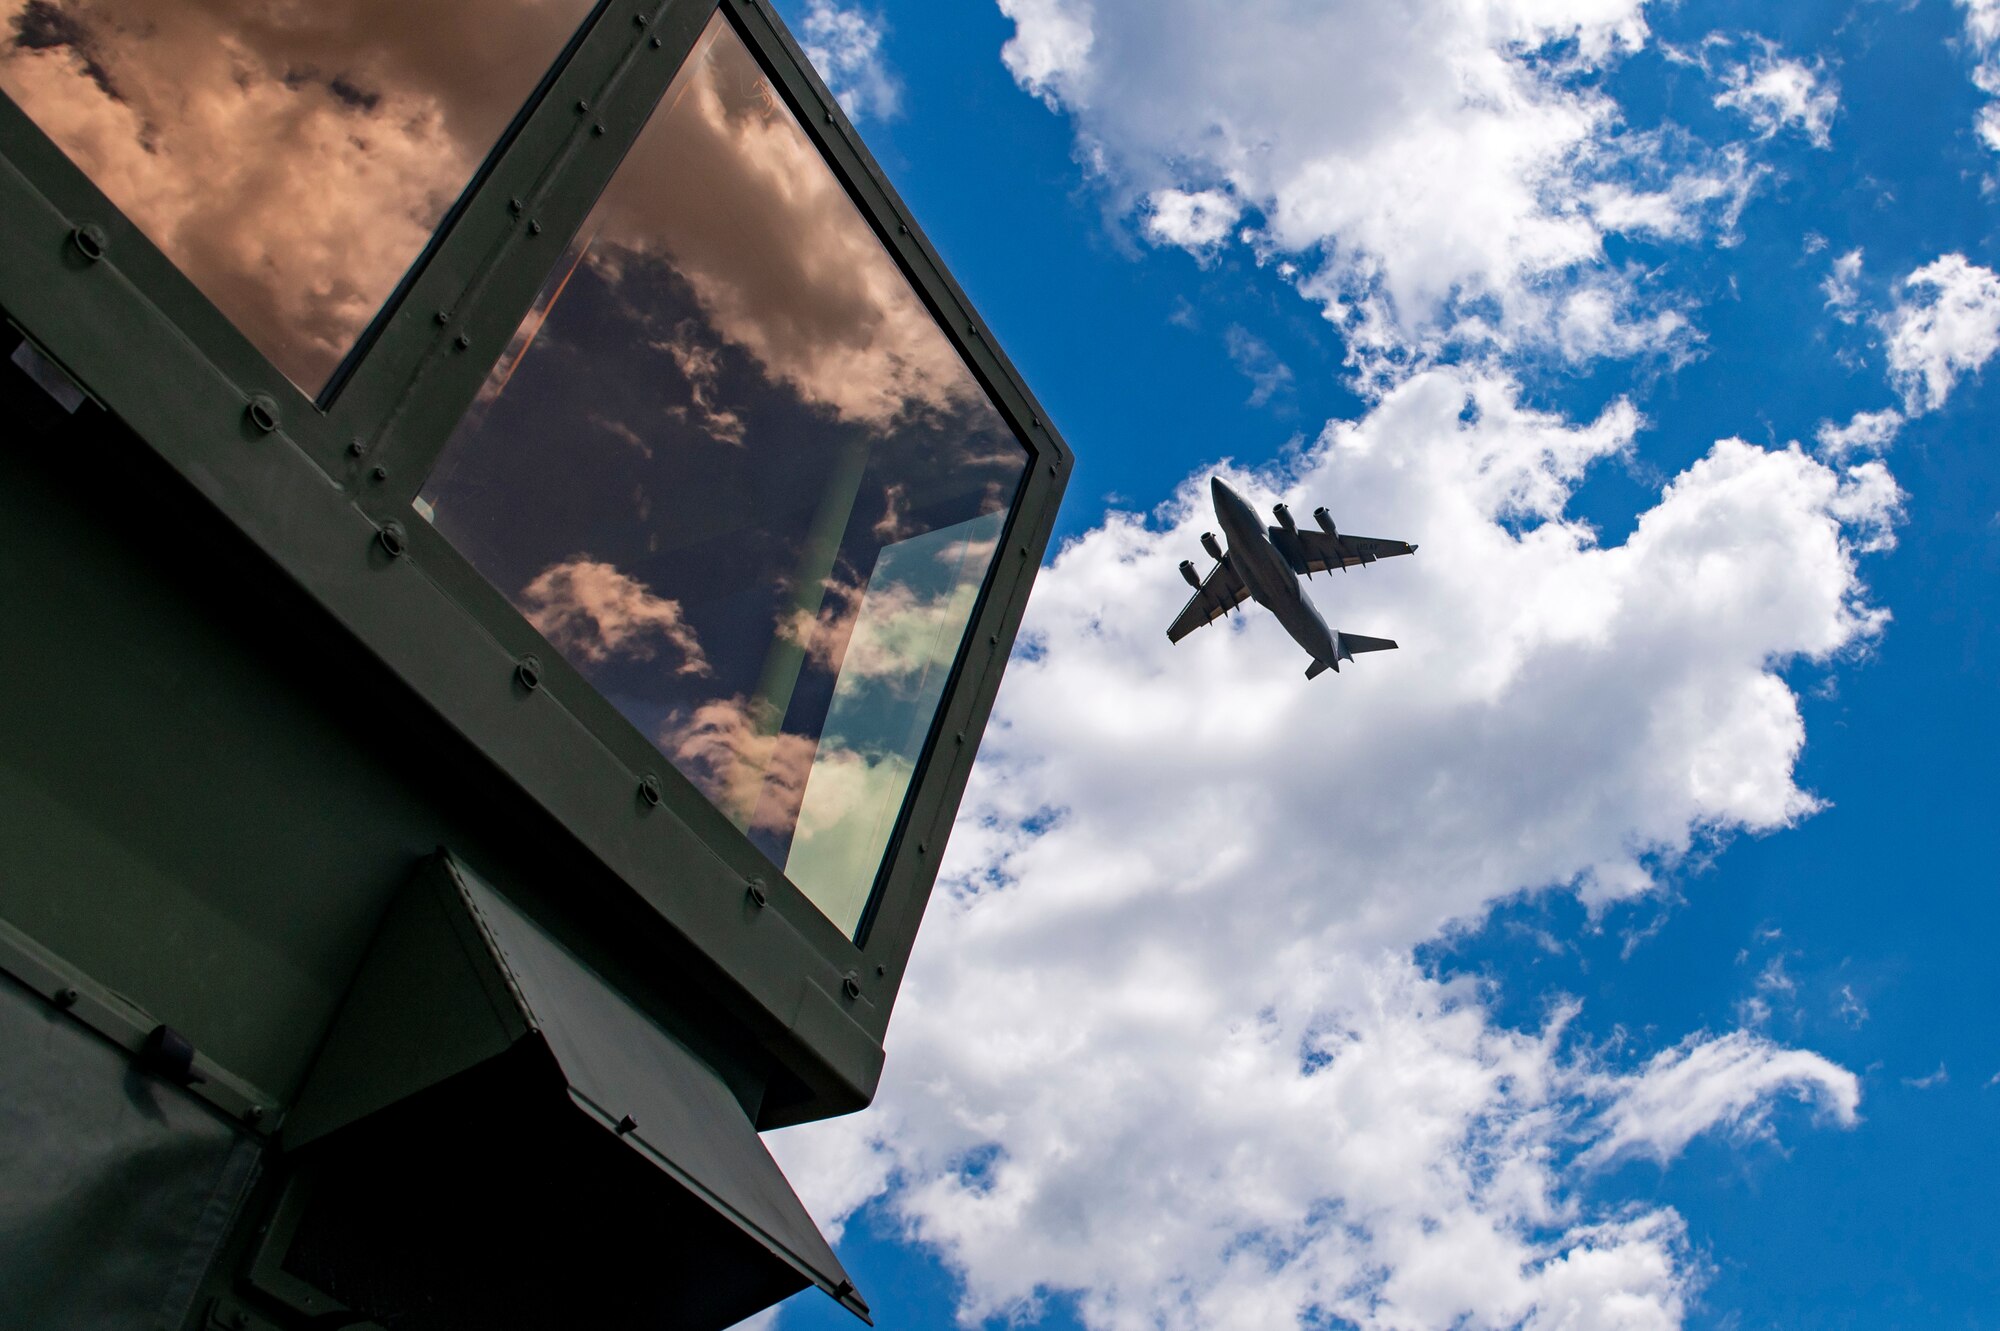 A U.S. Air Force C-17 Globemaster III from the 167th Airlift Wing, West Virginia Air National Guard, performs a low pass over a mobile air traffic control tower at Fort McCoy, Wis., June 14, 2021. PATRIOT 21 is a training exercise designed for civilian emergency management and responders to work with military entities to prepare for disasters.